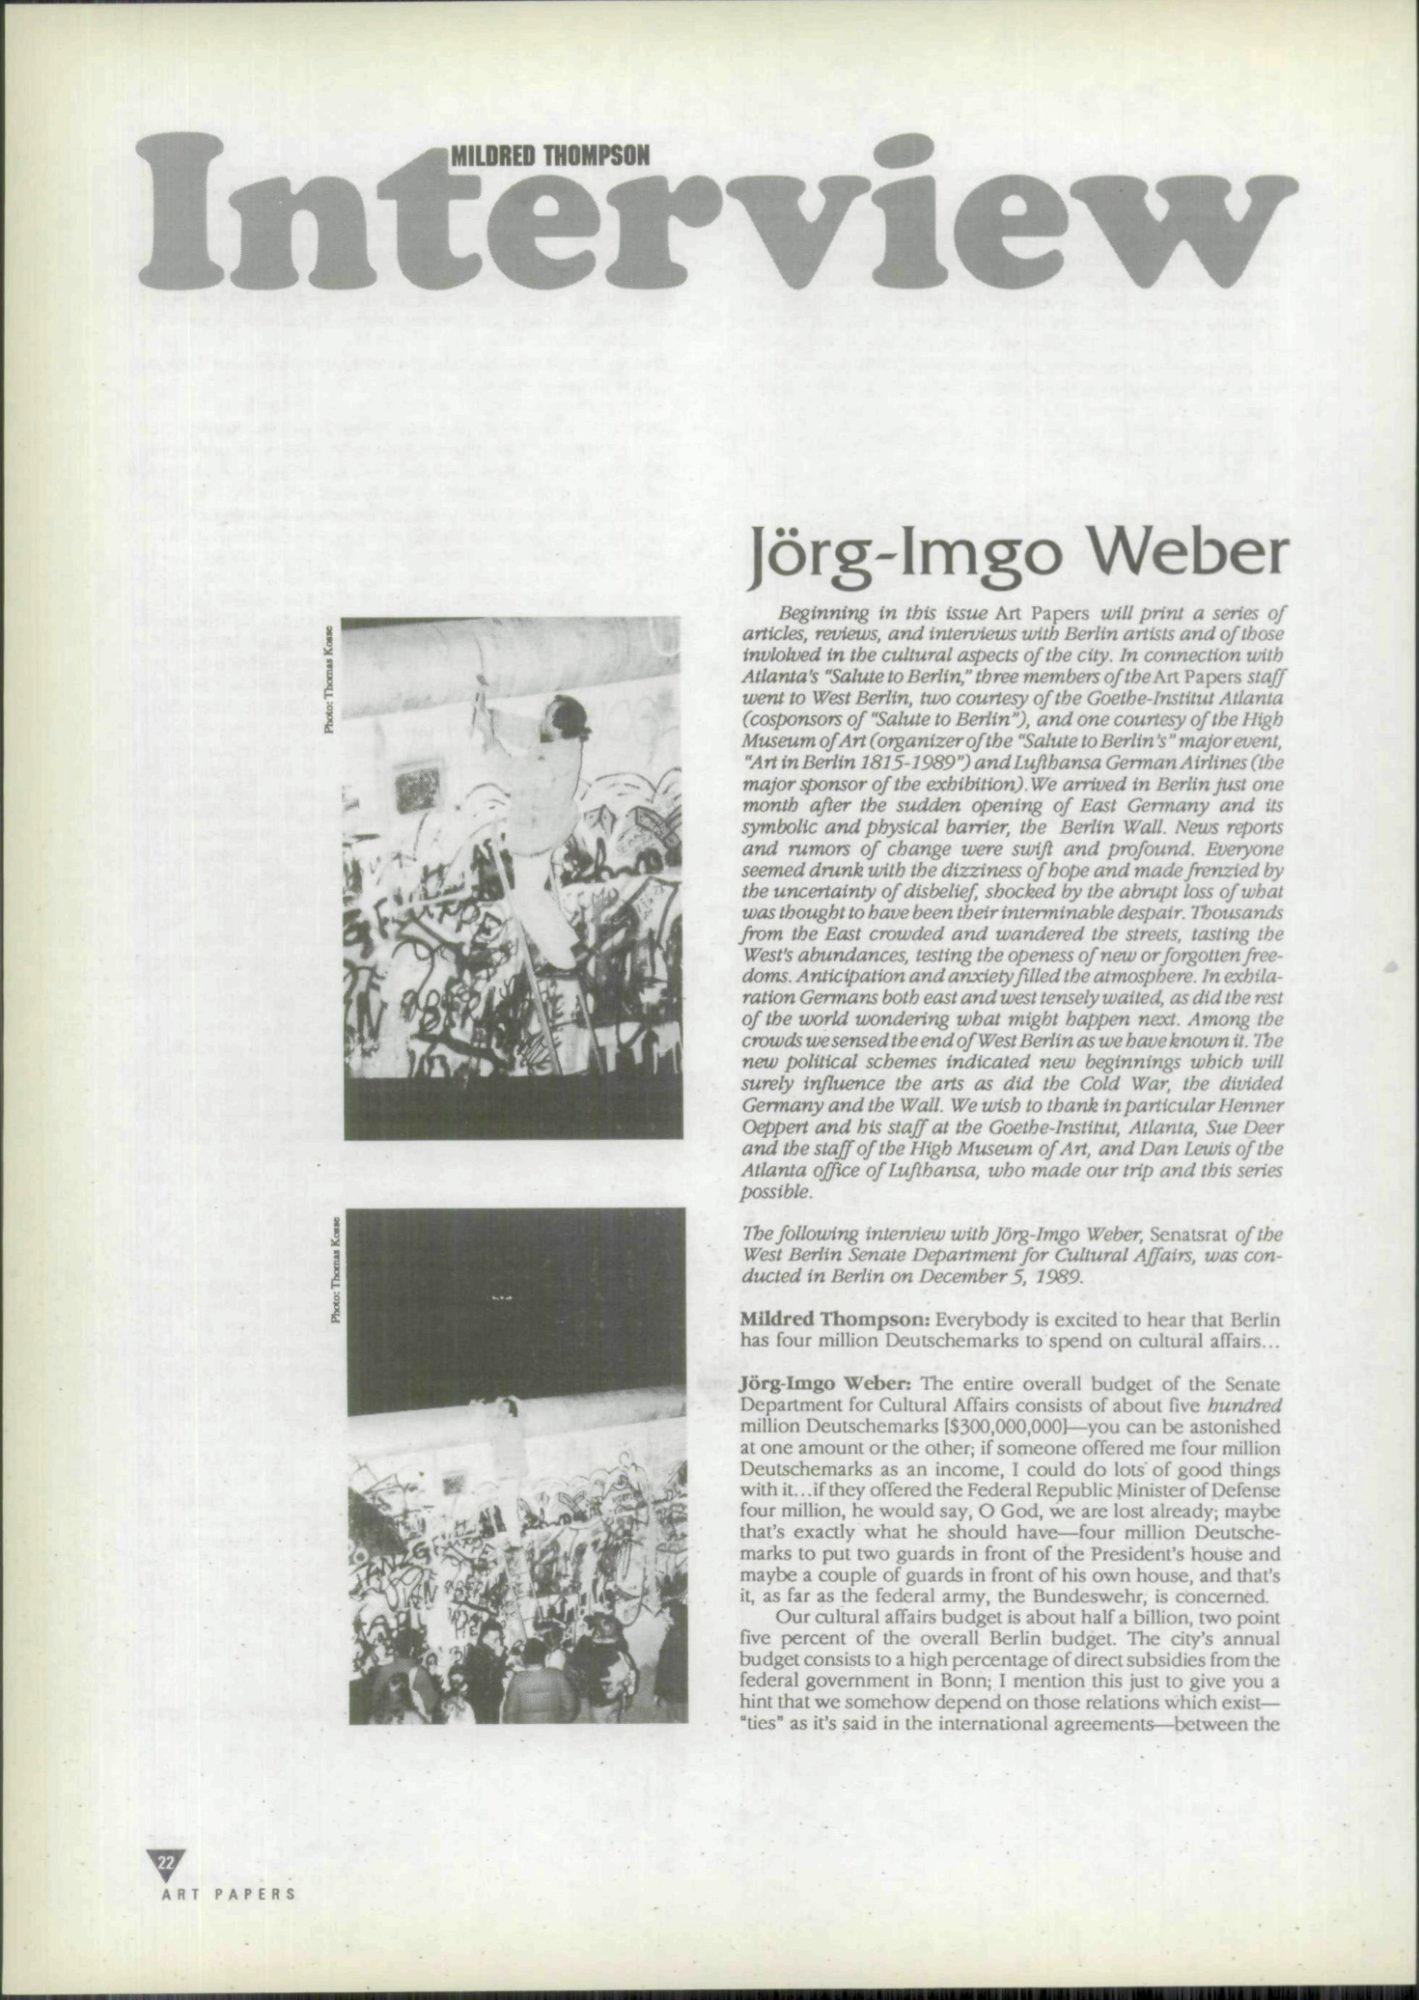 Scan of an interview between Mildred Thompson and Jörg-Imgo Weber.